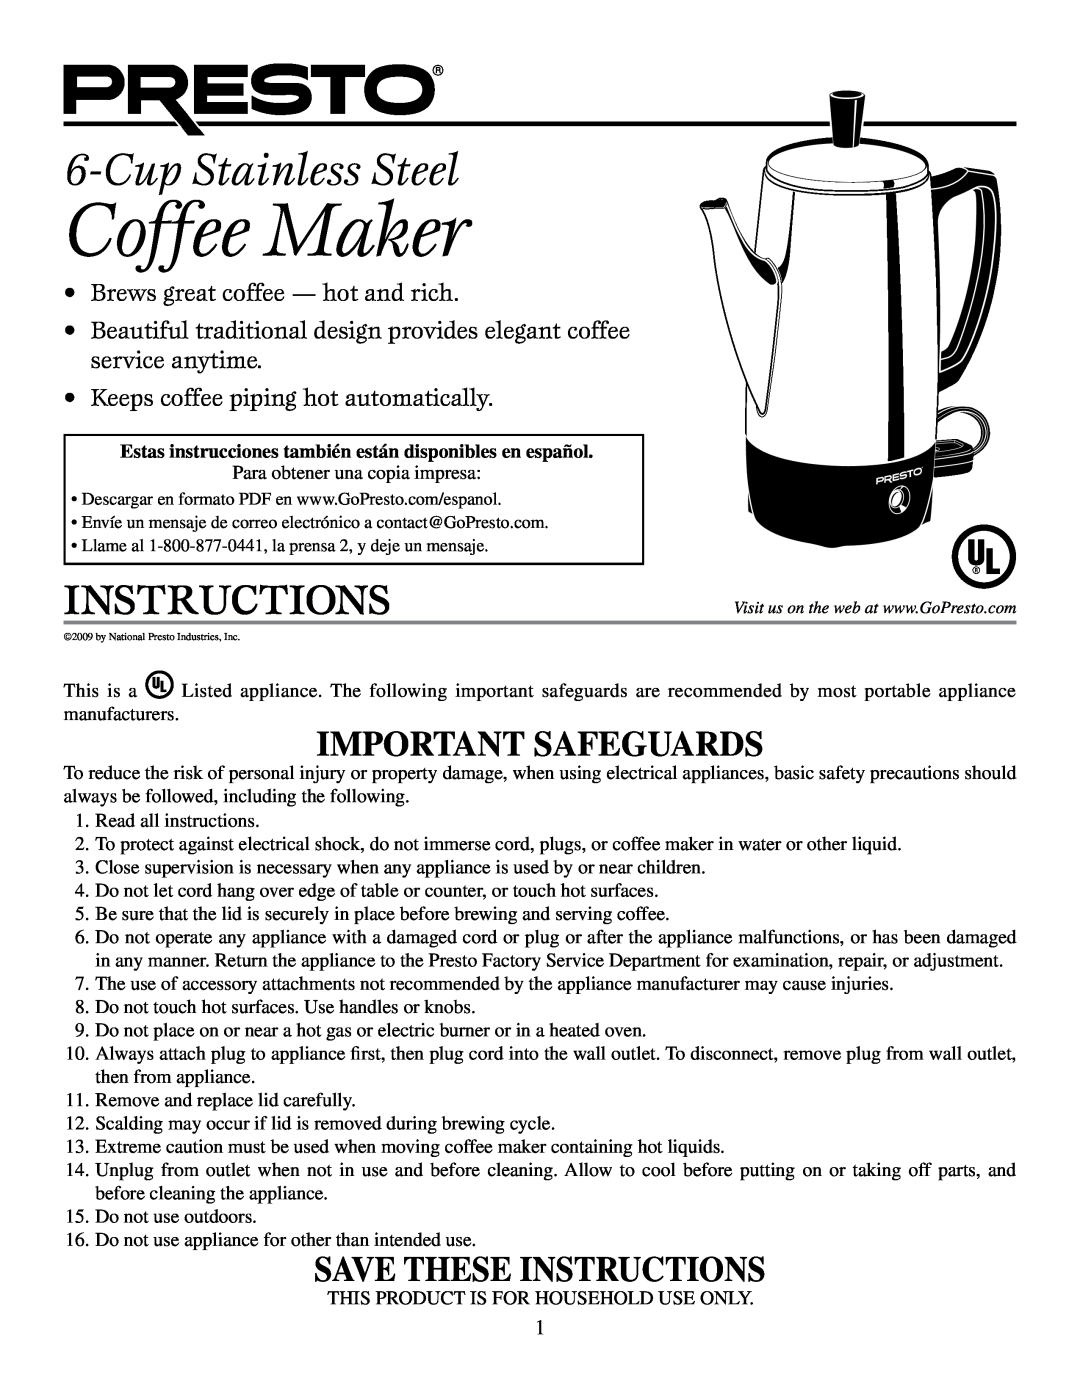 Presto Coffeemaker manual Coffee Maker, CupStainless Steel, Important Safeguards, Save These Instructions 